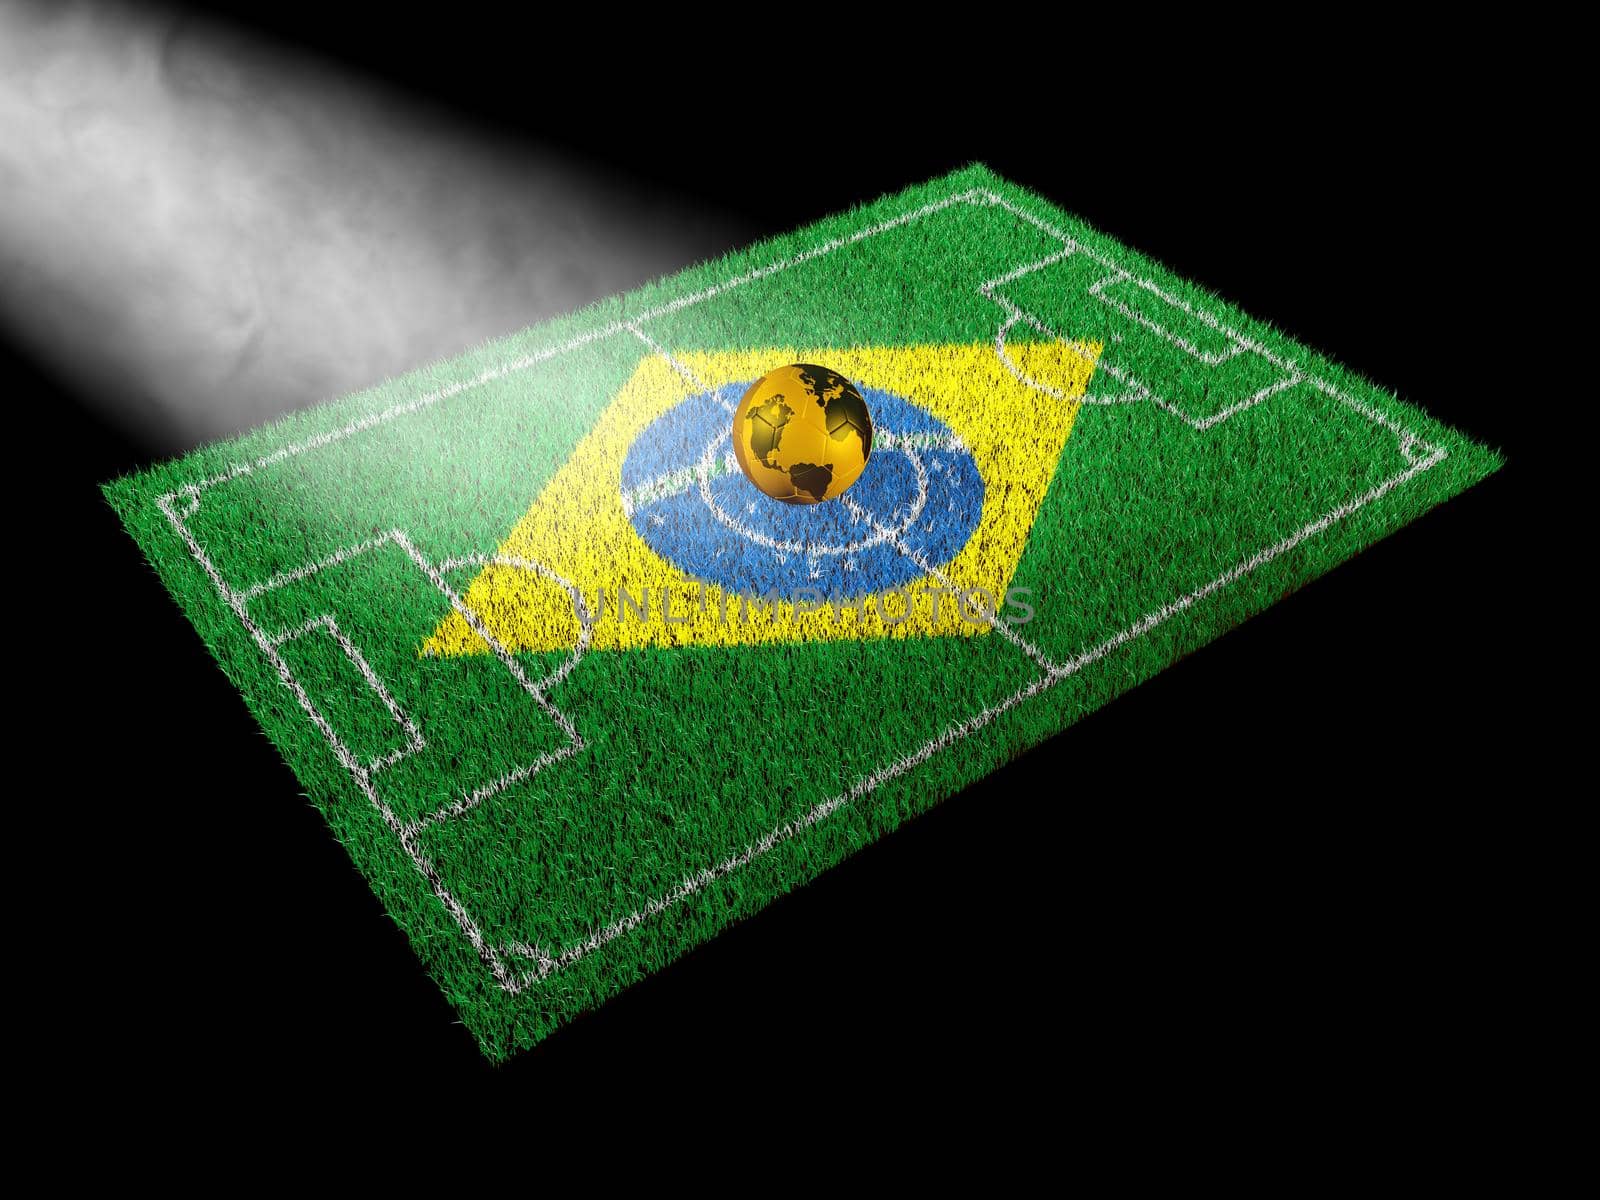 golden ball with world map on soccer field